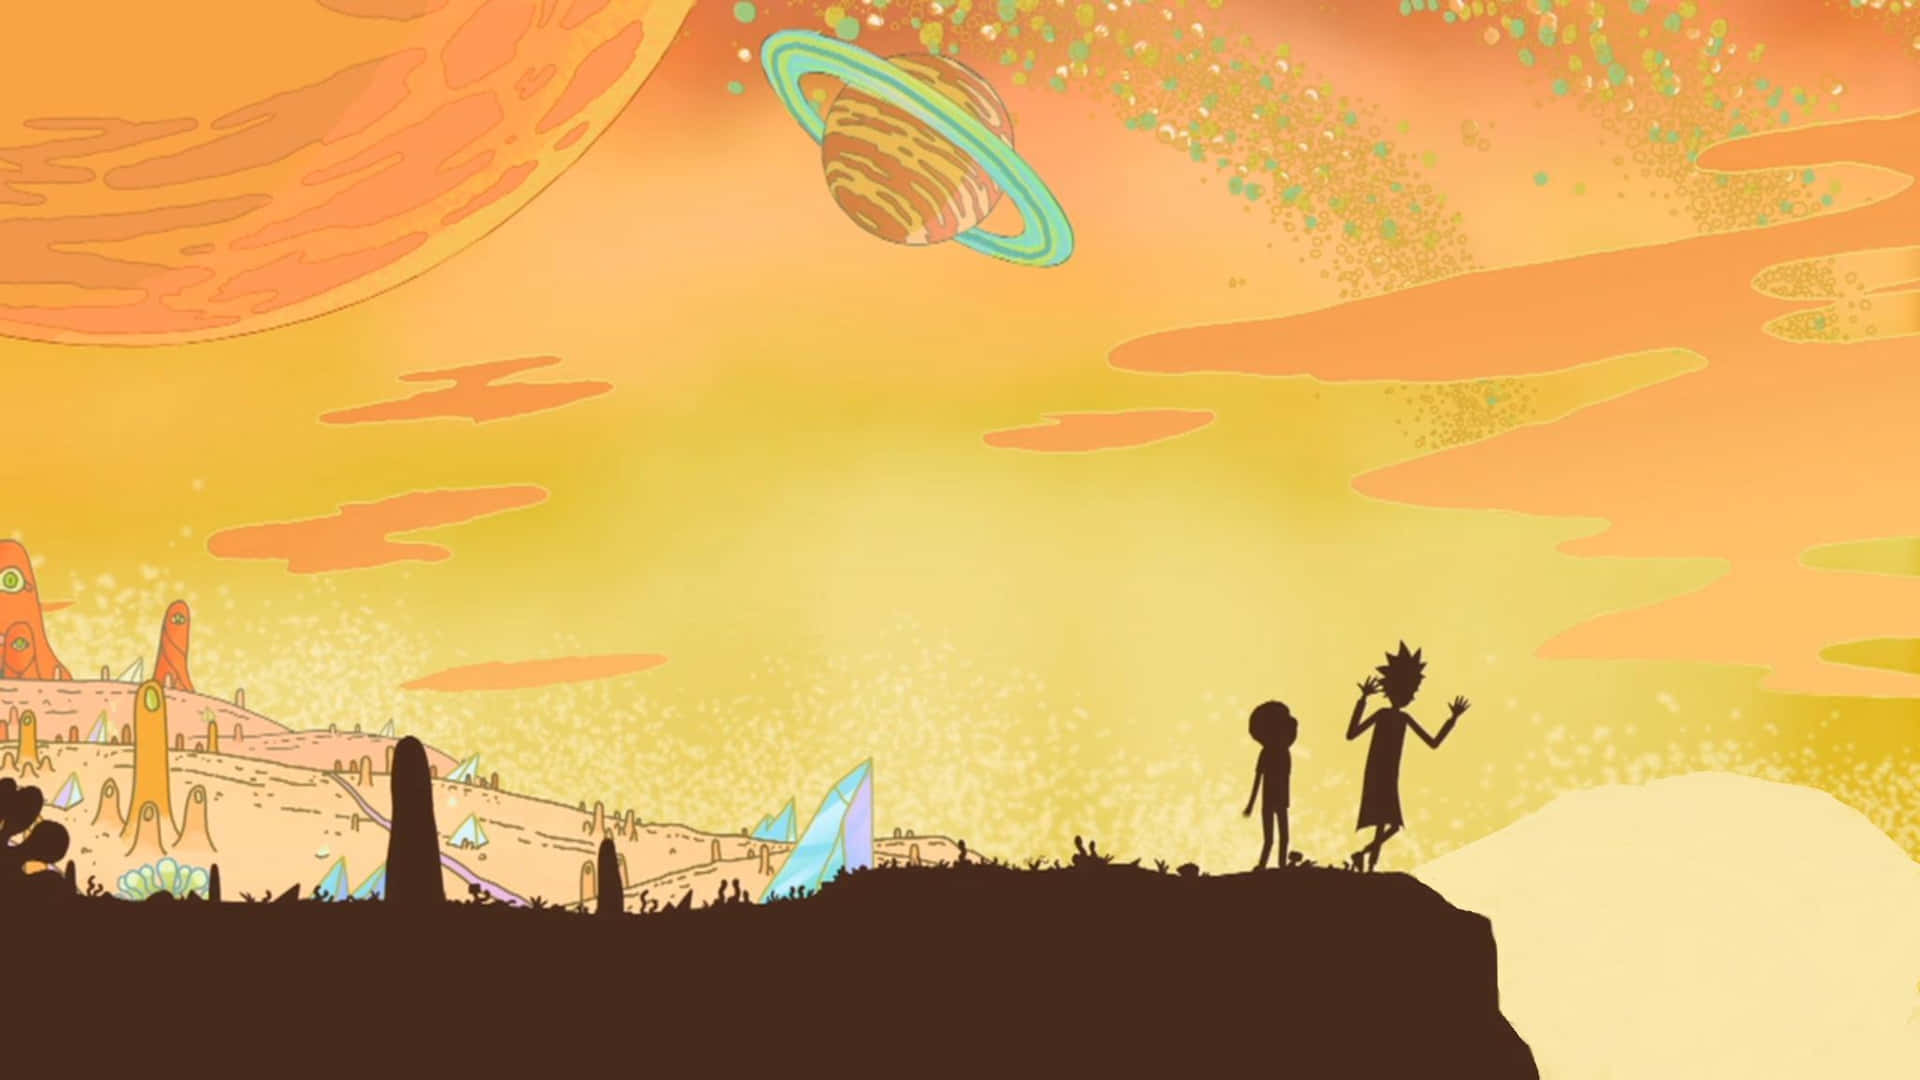 Take an intergalactic adventure with Rick and Morty in their Backwoods adventure Wallpaper